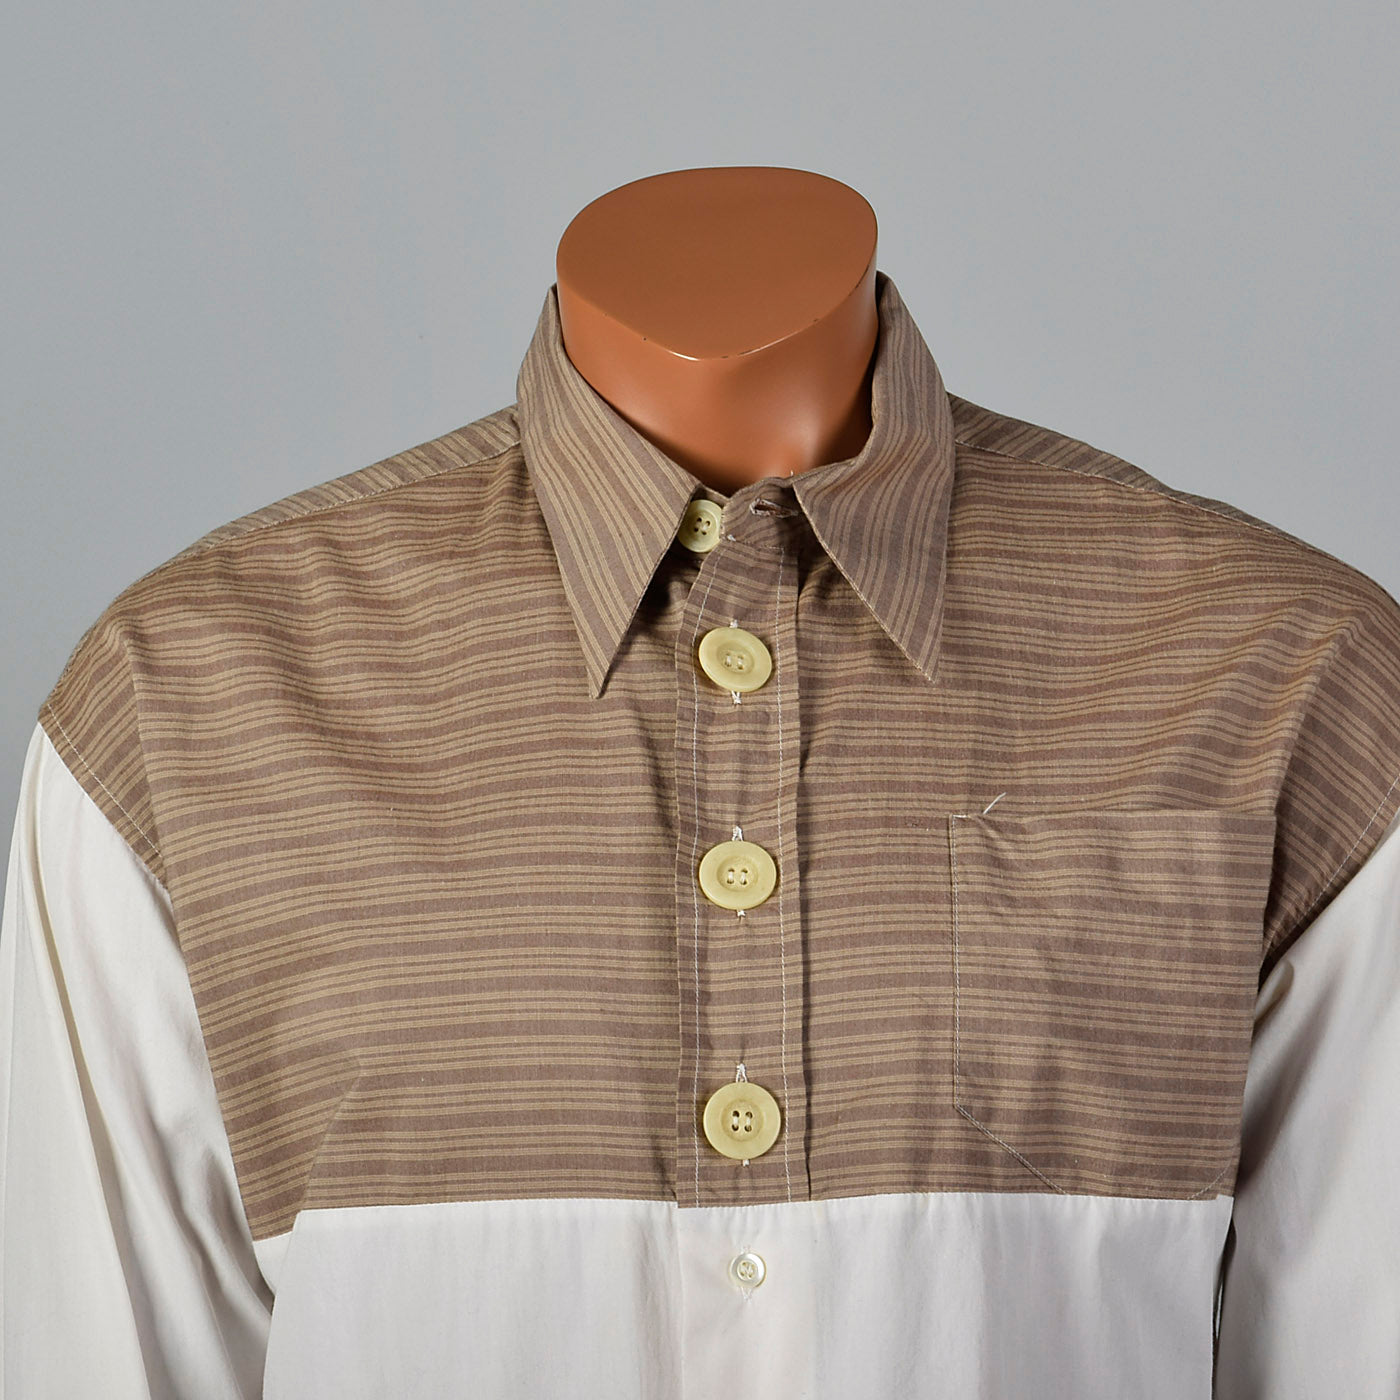 2000s Dolce & Gabbana Brown and Blue Color Blocked Shirt